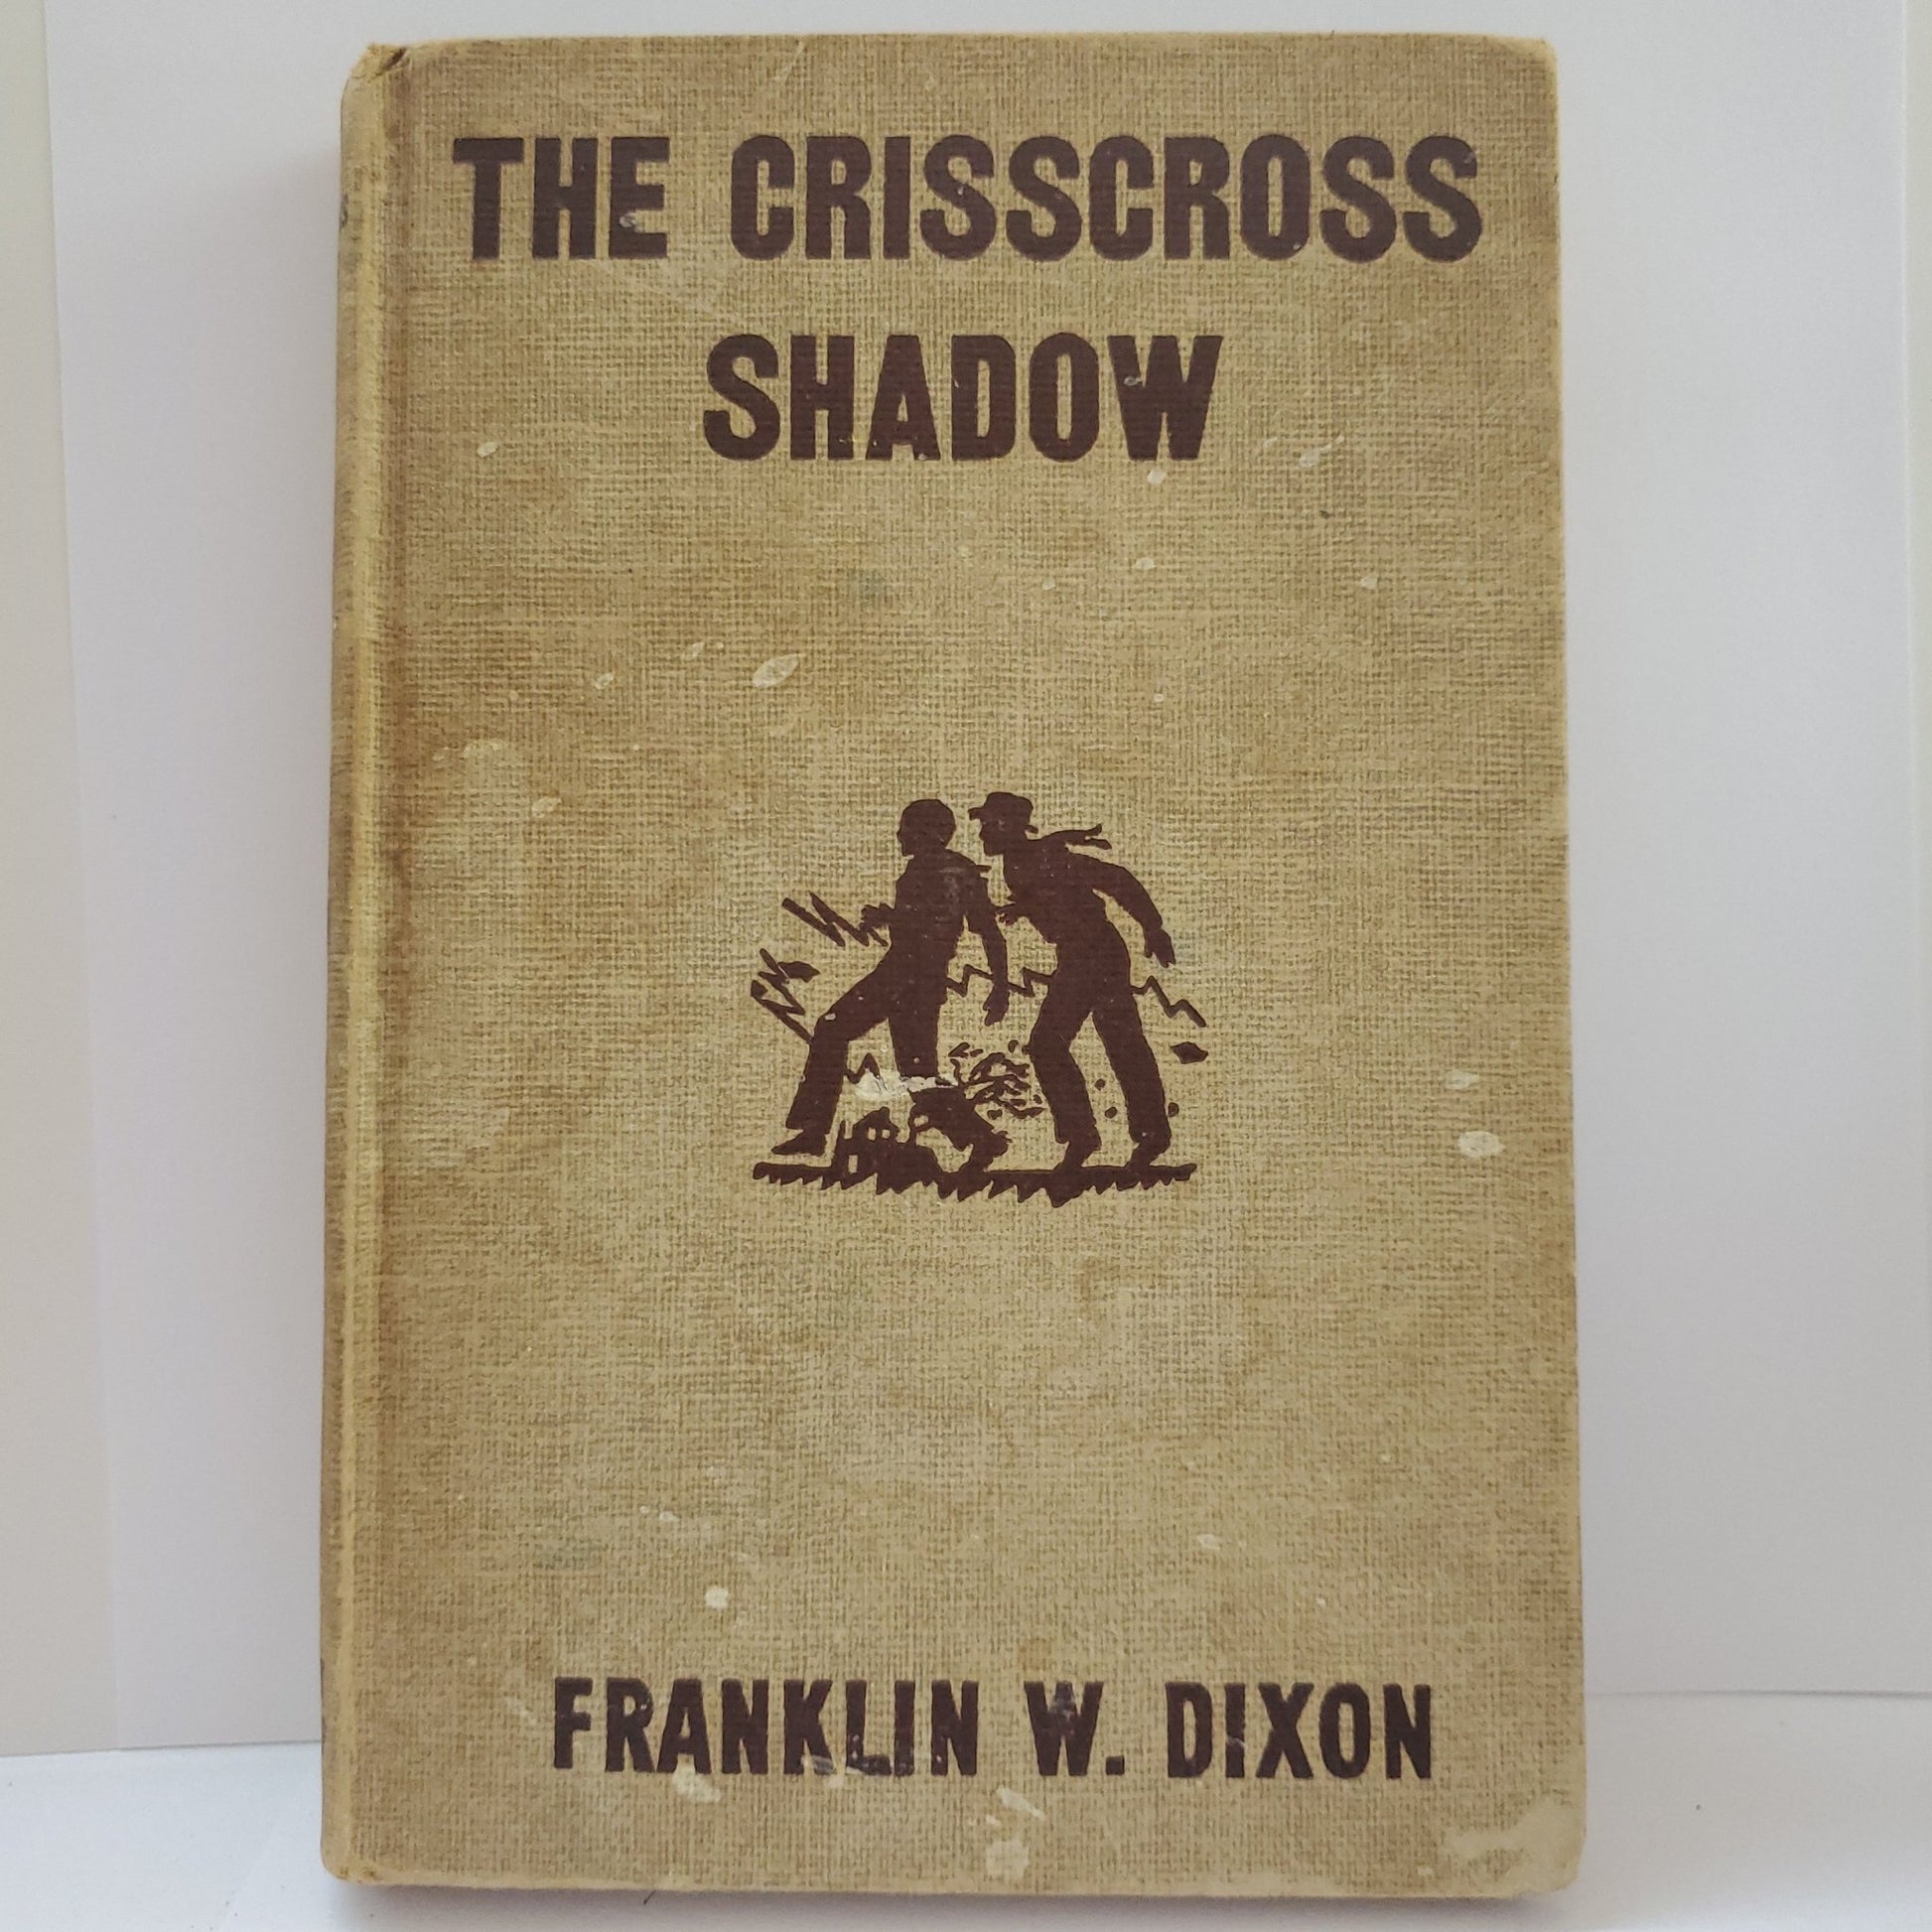 The Crisscross Shadow - [ash-ling] Booksellers